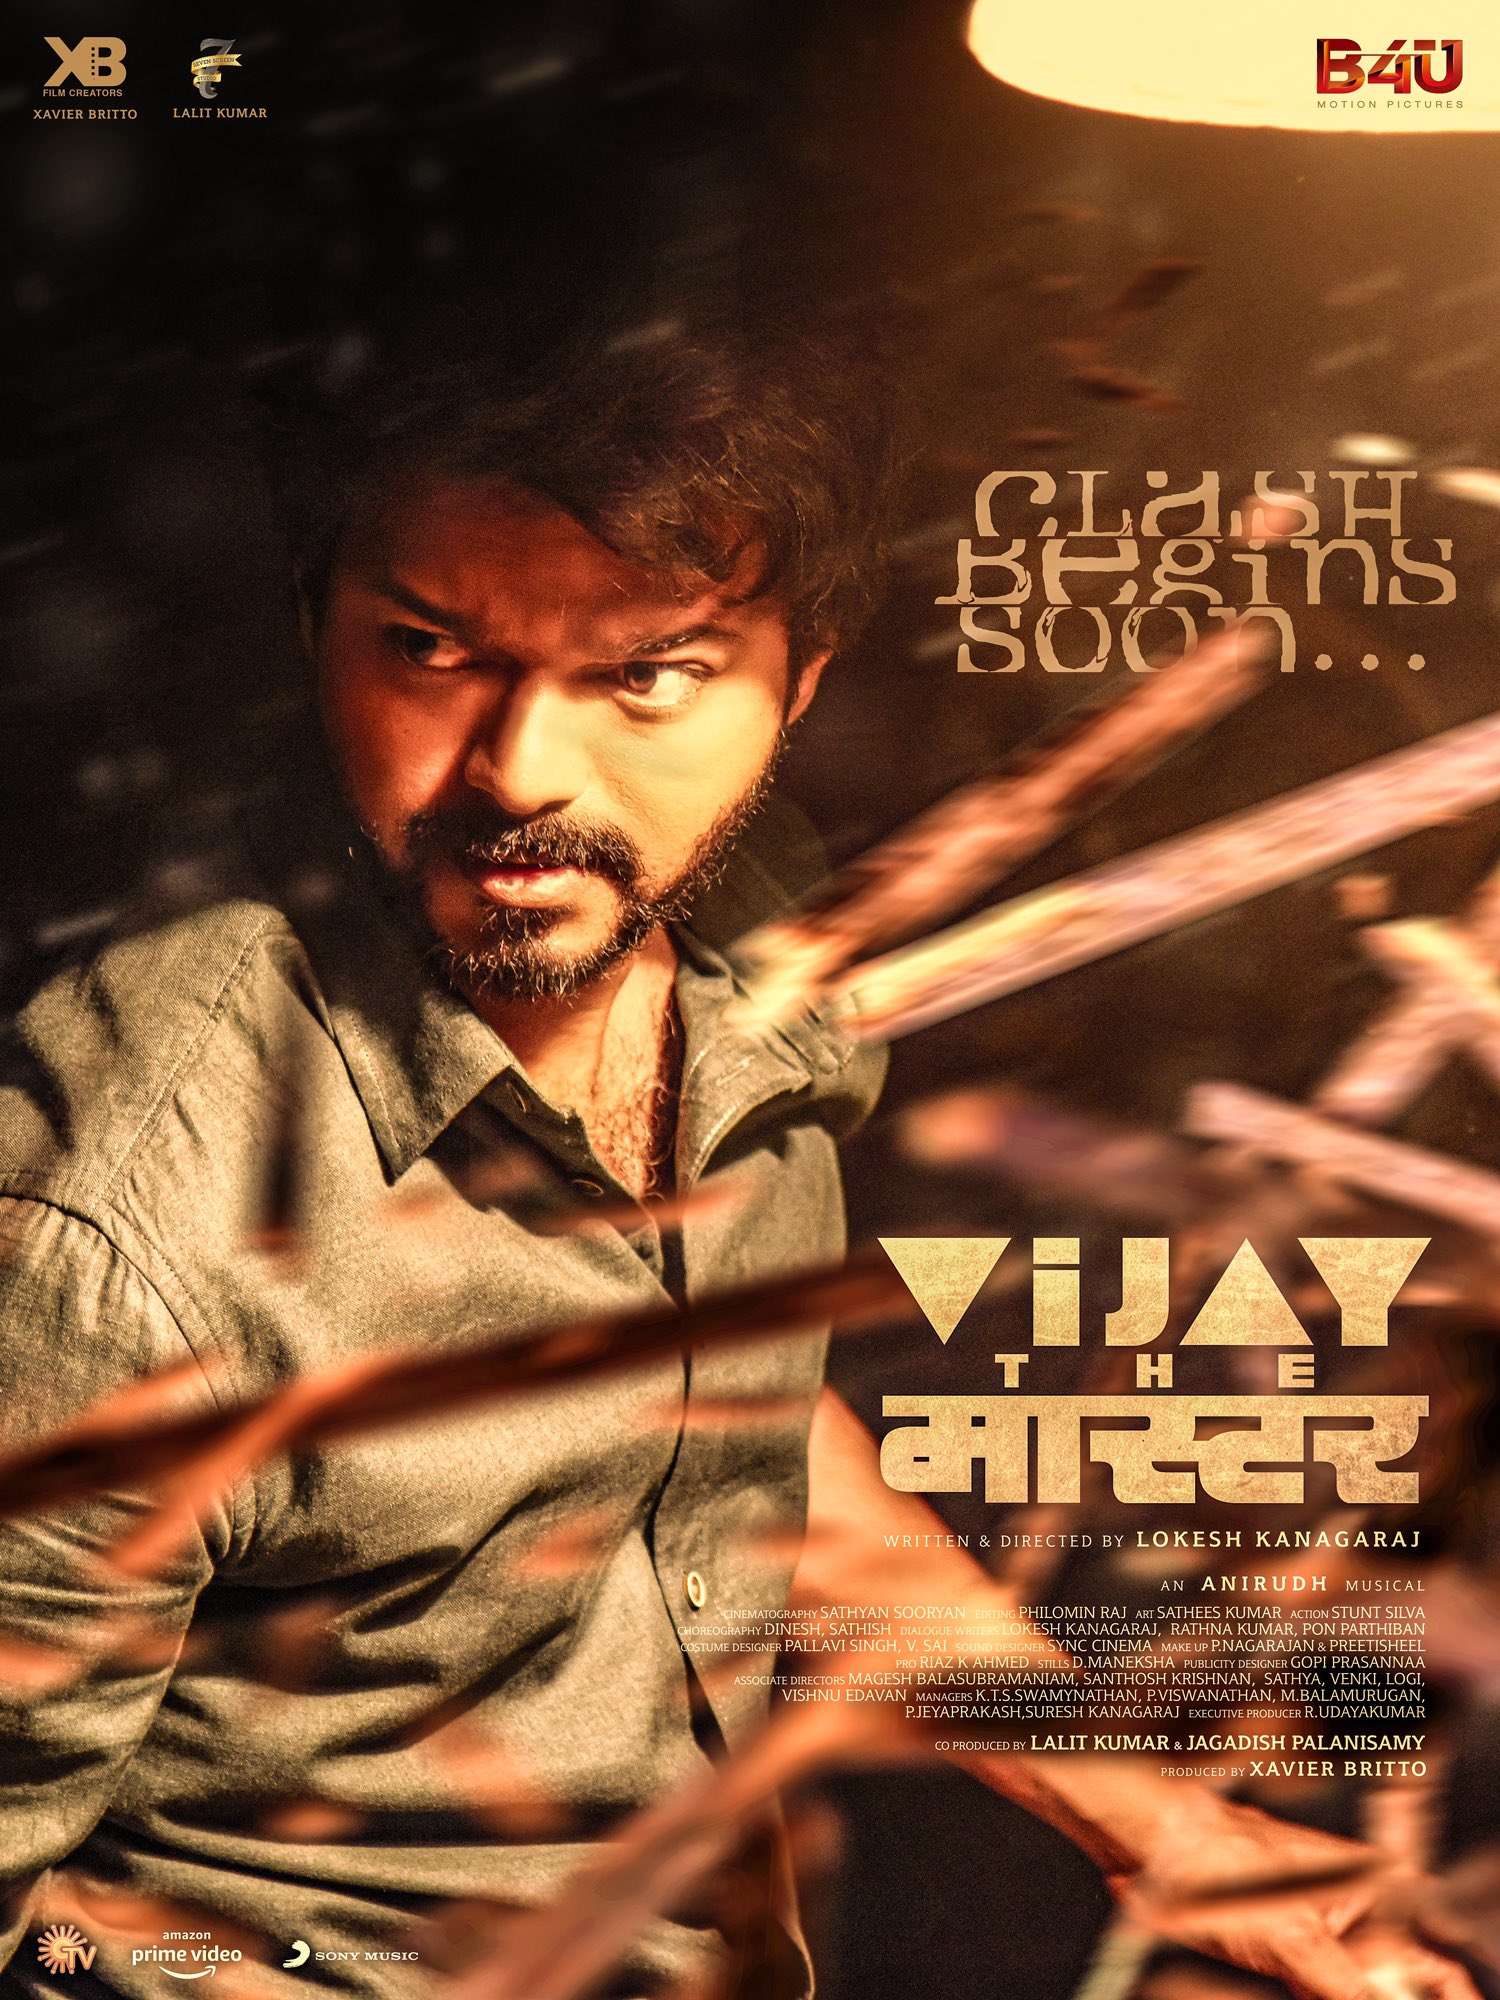 Thalapathy Vijay's Master to release in Hindi; film titled Vijay The Master  | Tamil Movie News - Times of India